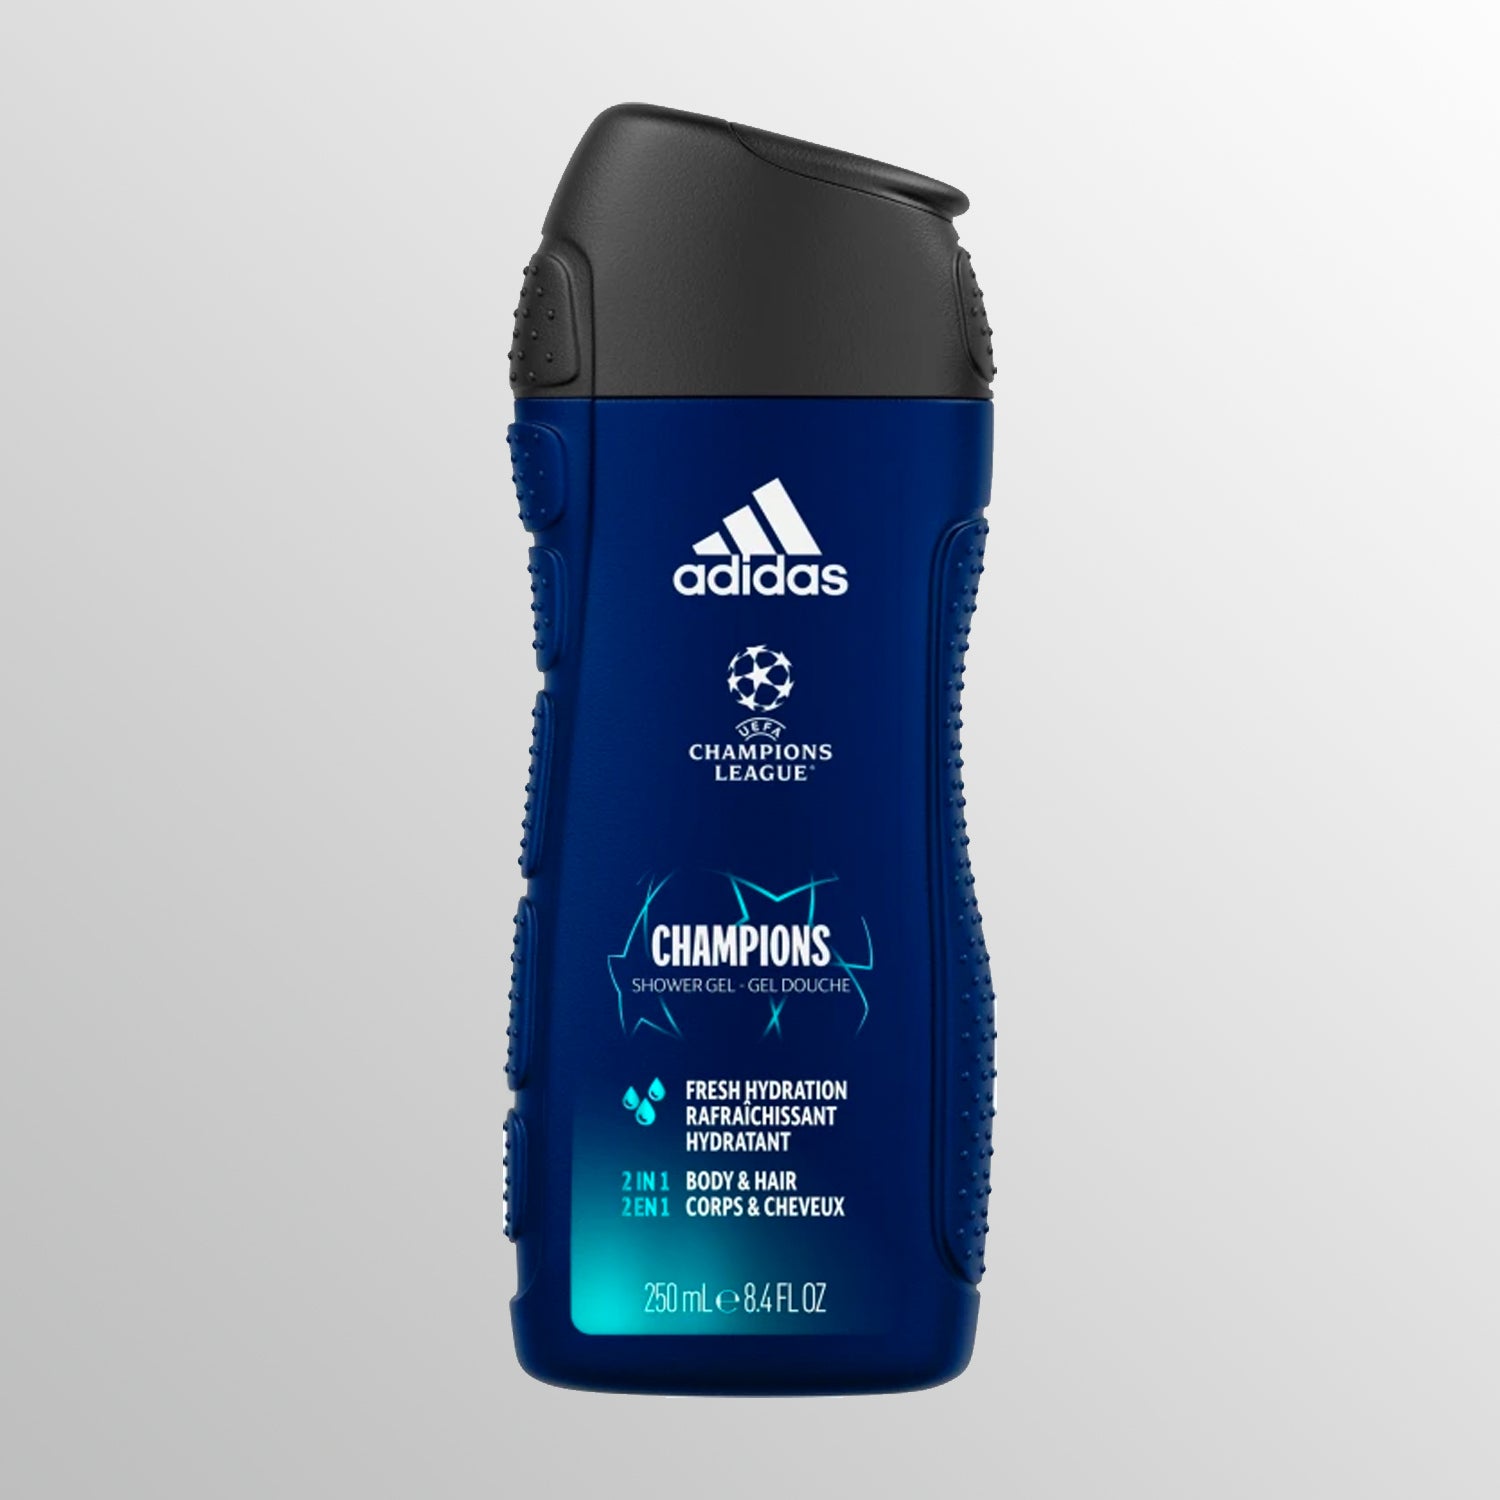 Adidas Champions Shower Gel UEFA Club Competitions Online Store